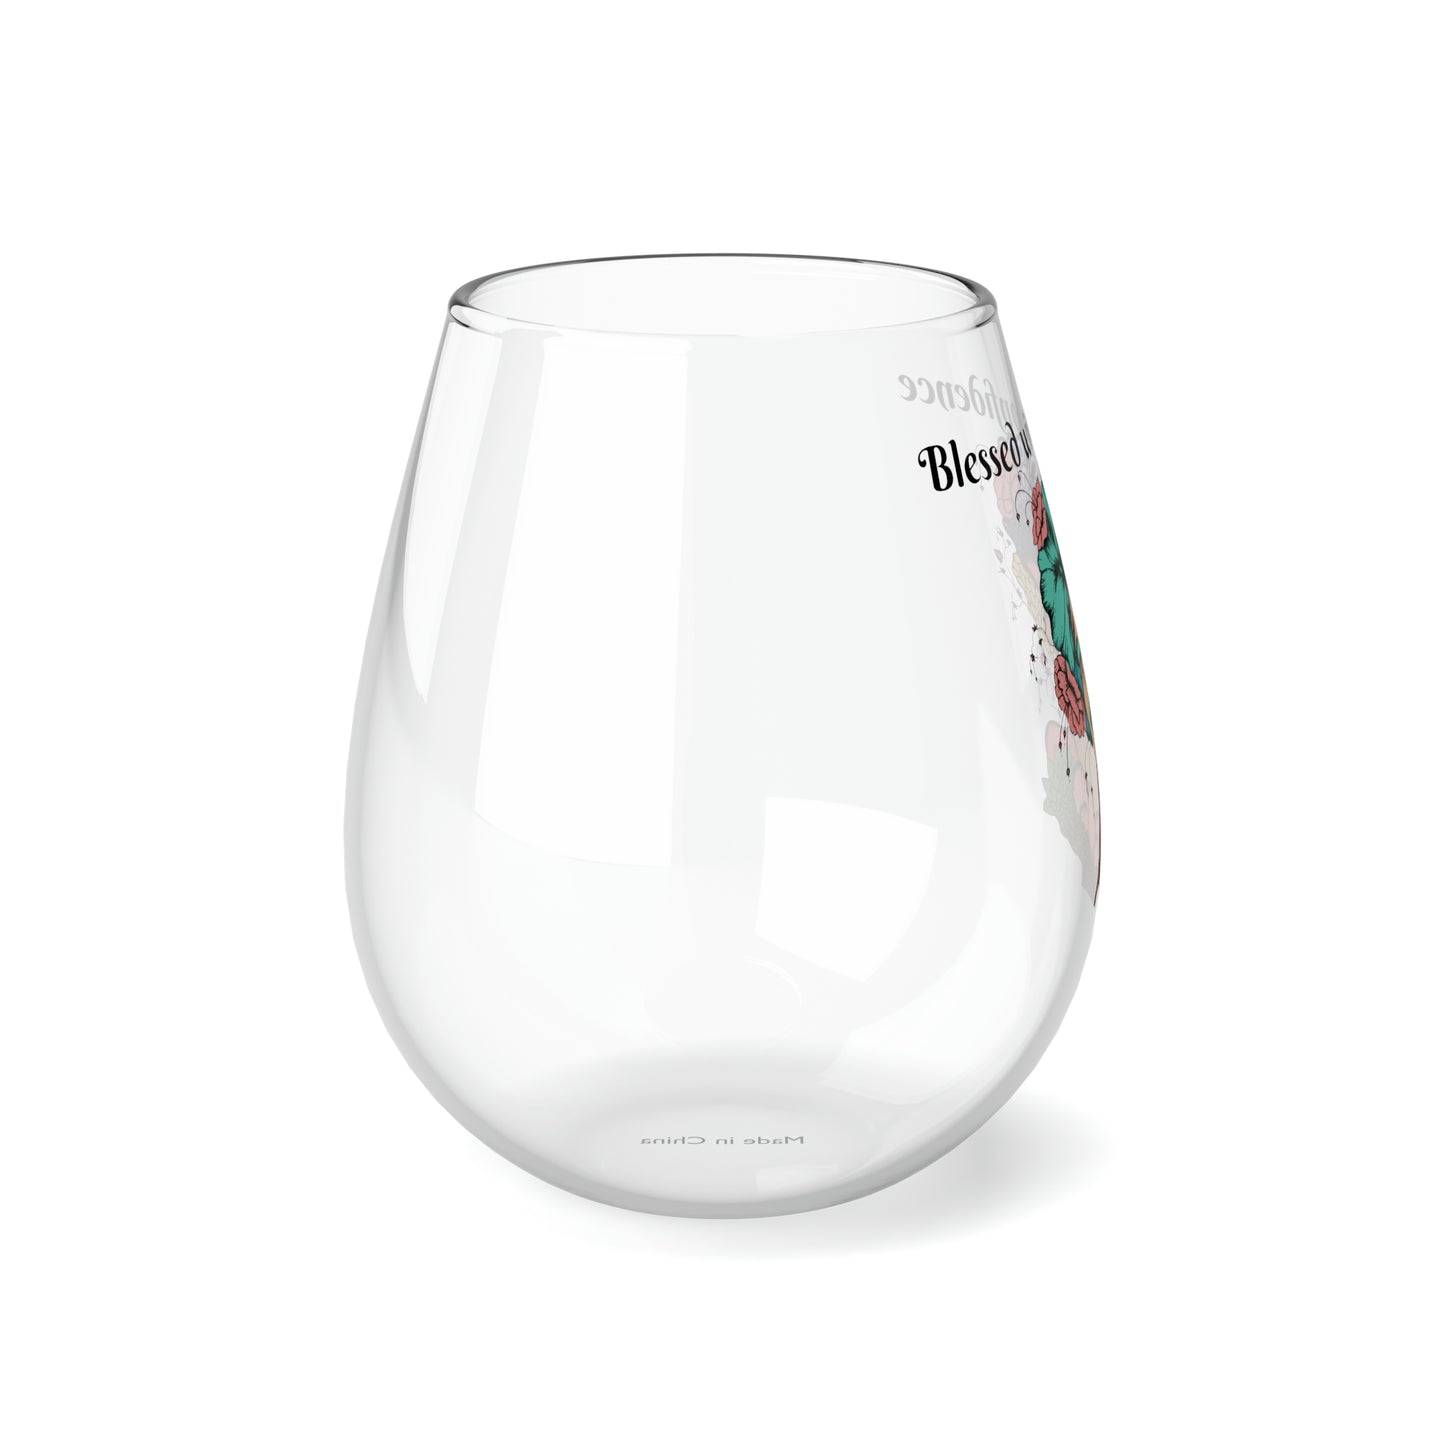 Peaceful Stemless Wine Glass, 11.75oz Blessed with Confidence